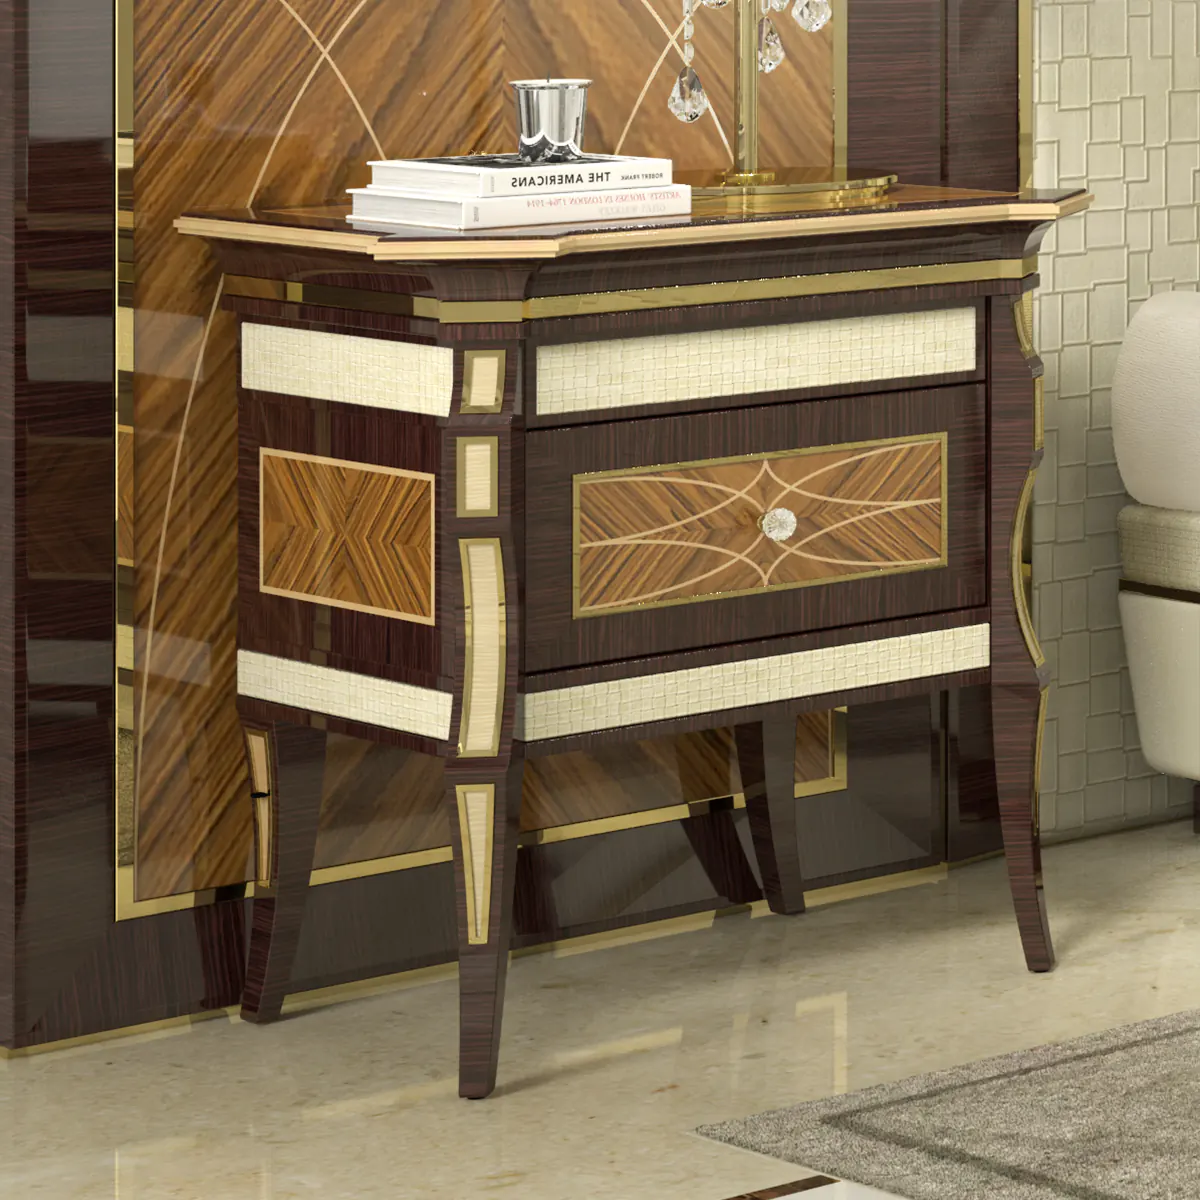 Monte Carlo LUX nightstand